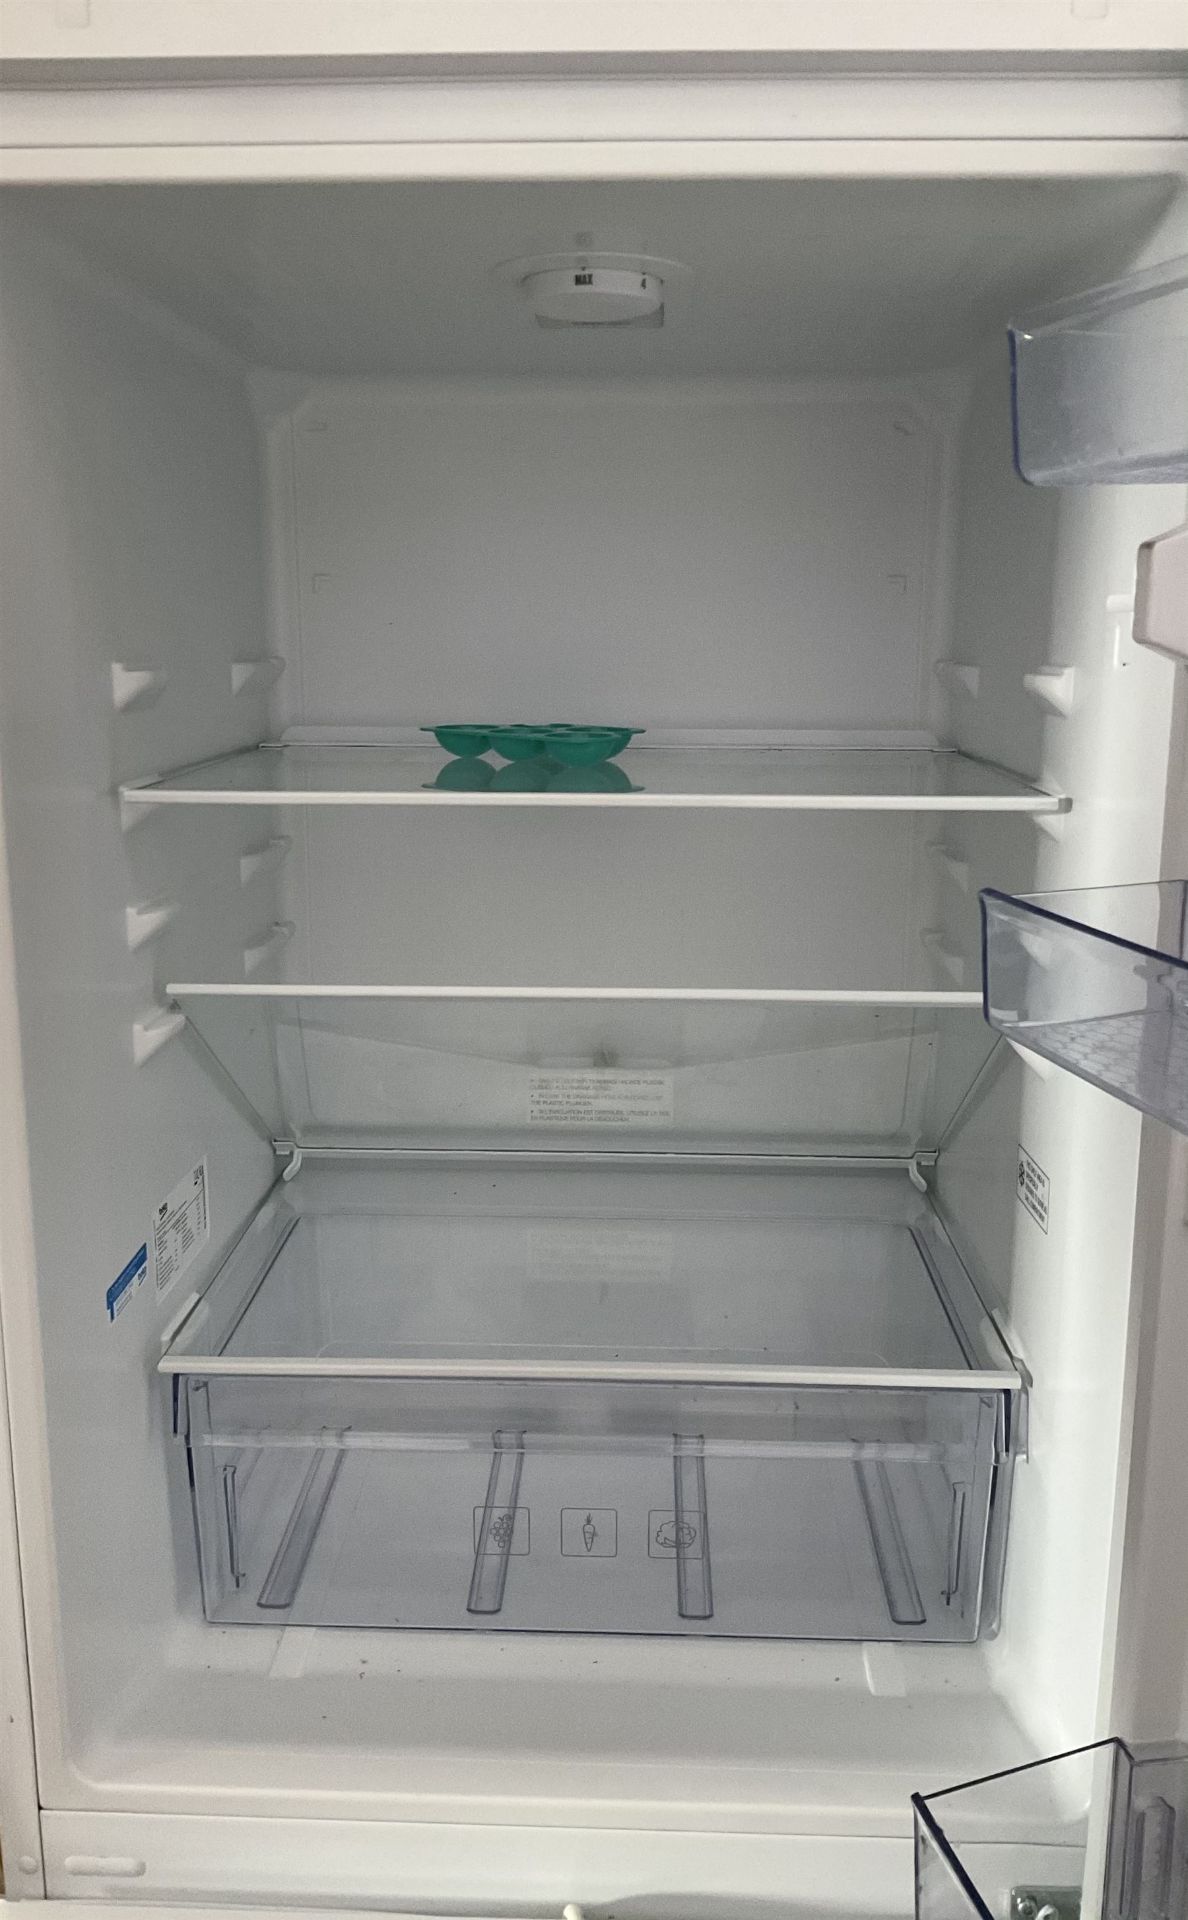 Beko CXFG1552W fridge freezer - THIS LOT IS TO BE COLLECTED BY APPOINTMENT FROM DUGGLEBY STORAGE - Image 2 of 3